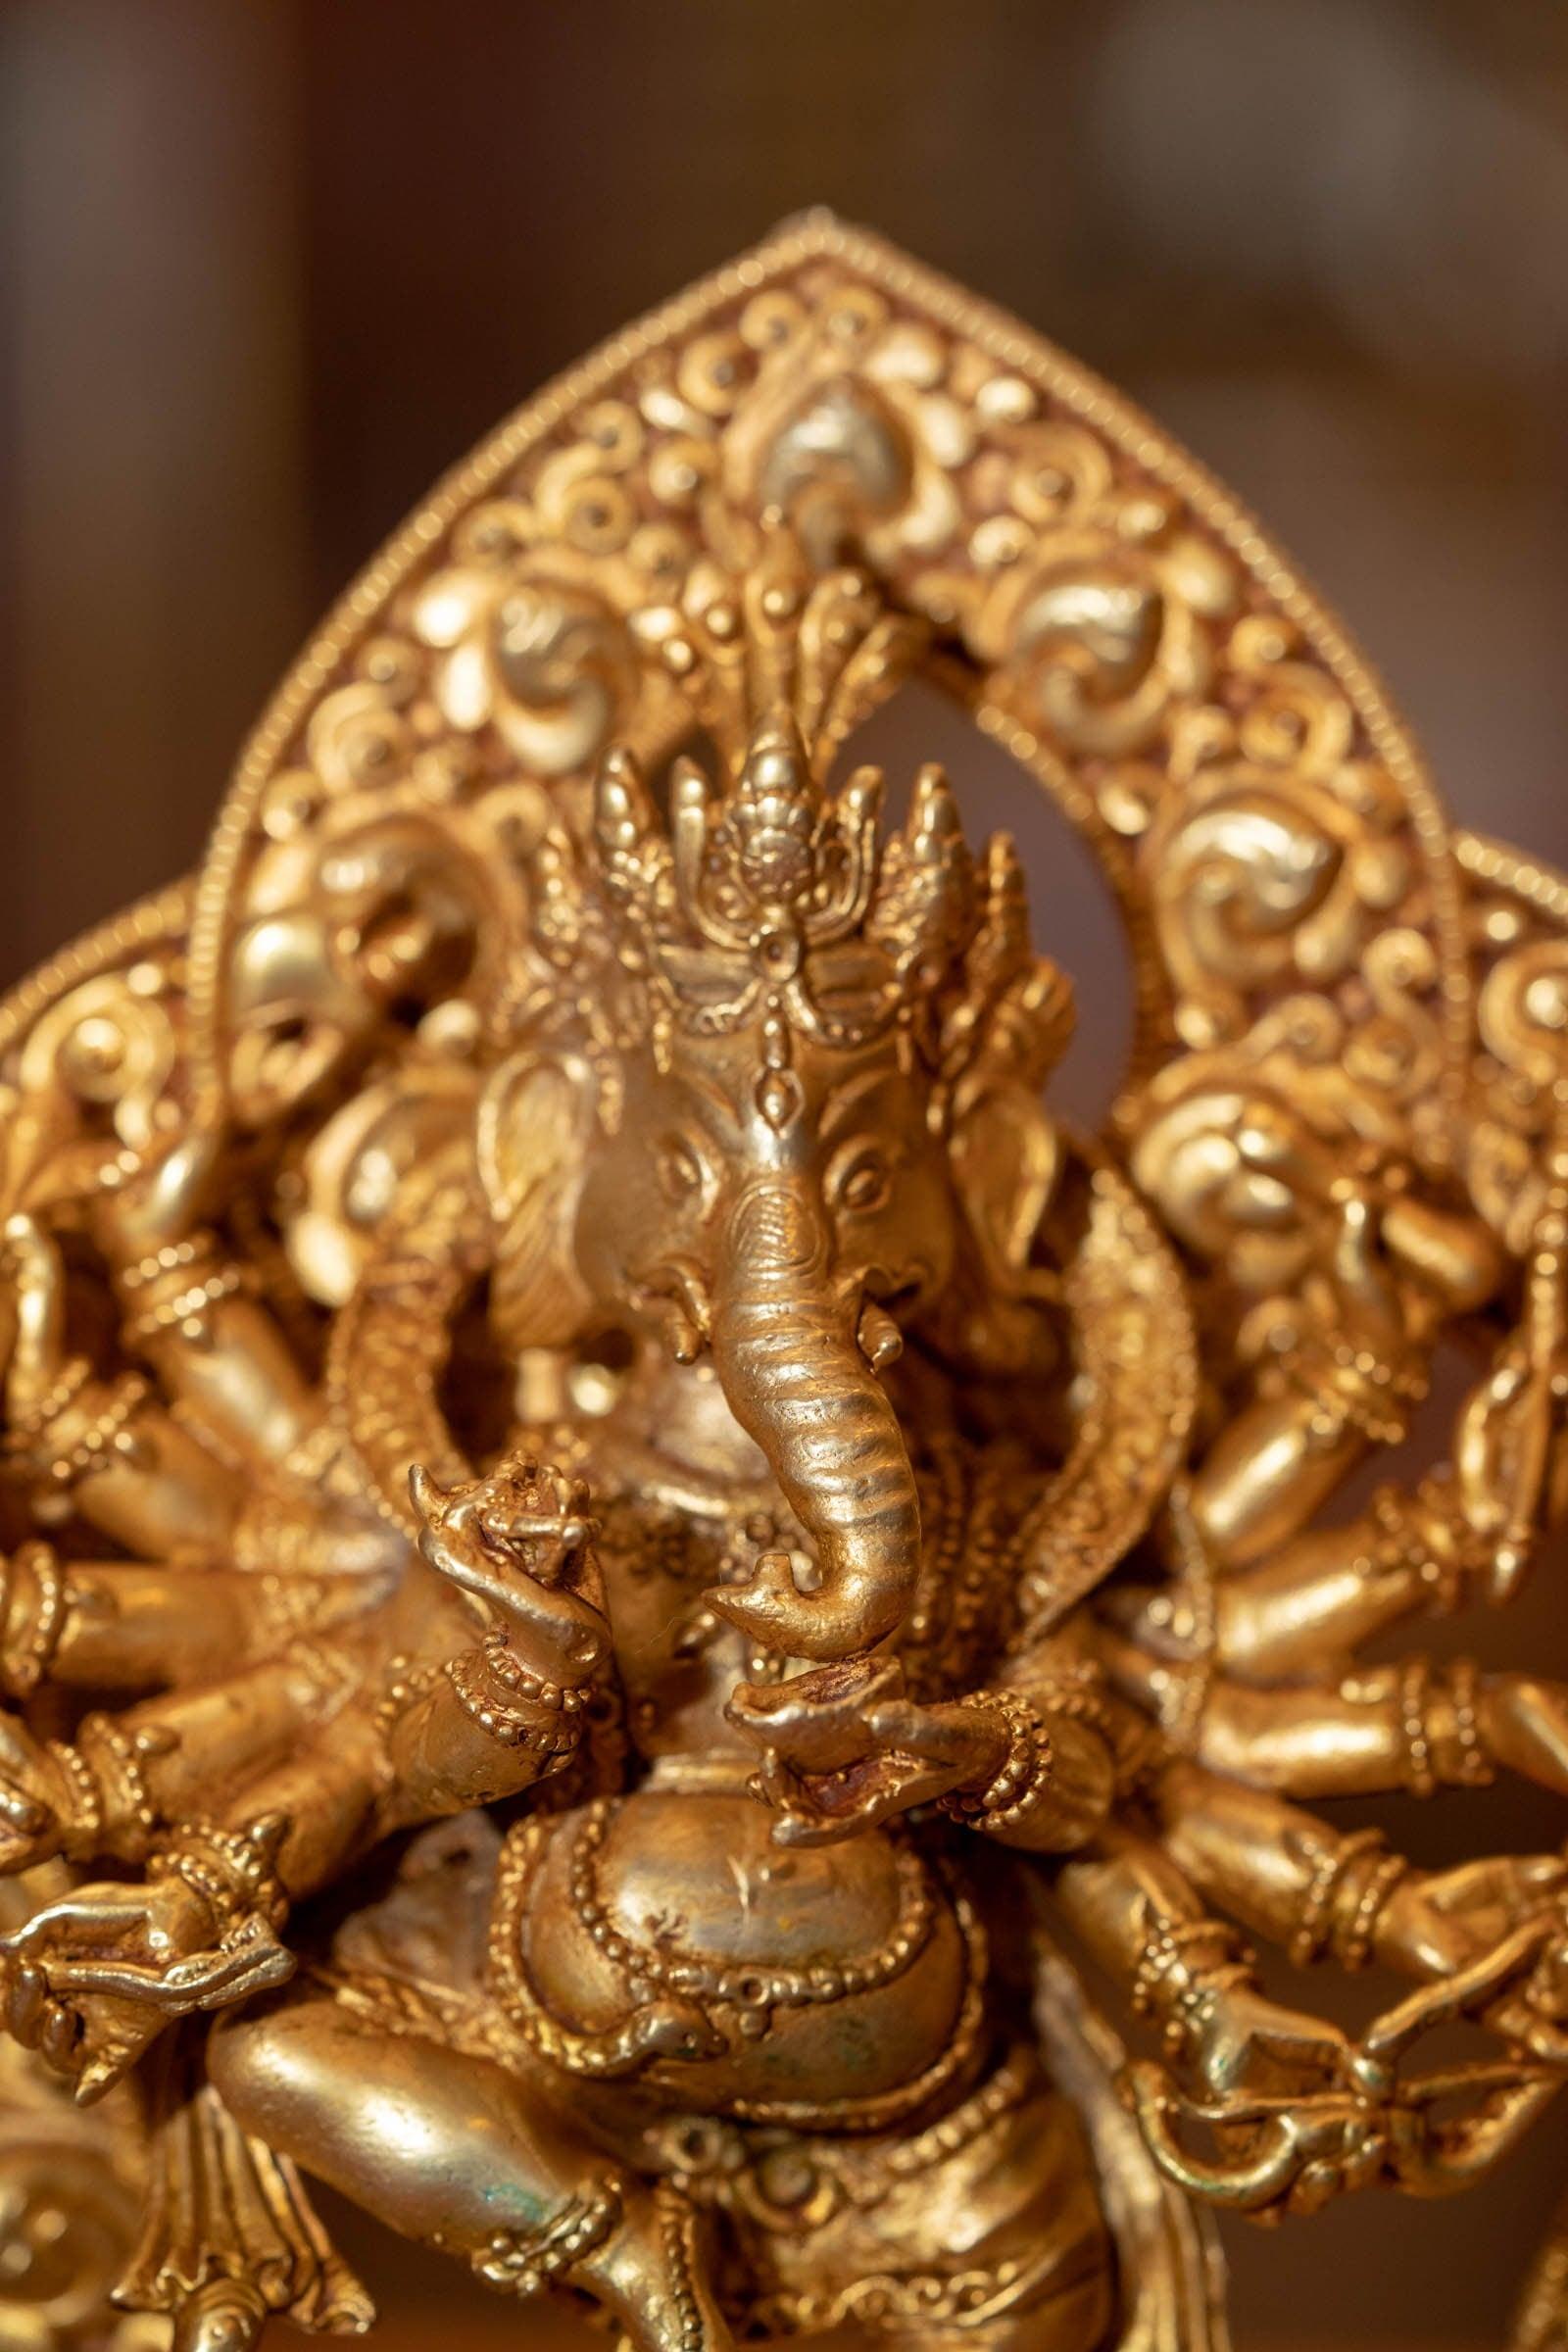 10 hand Ganesh handmade statue of High quality bronze with gold plated